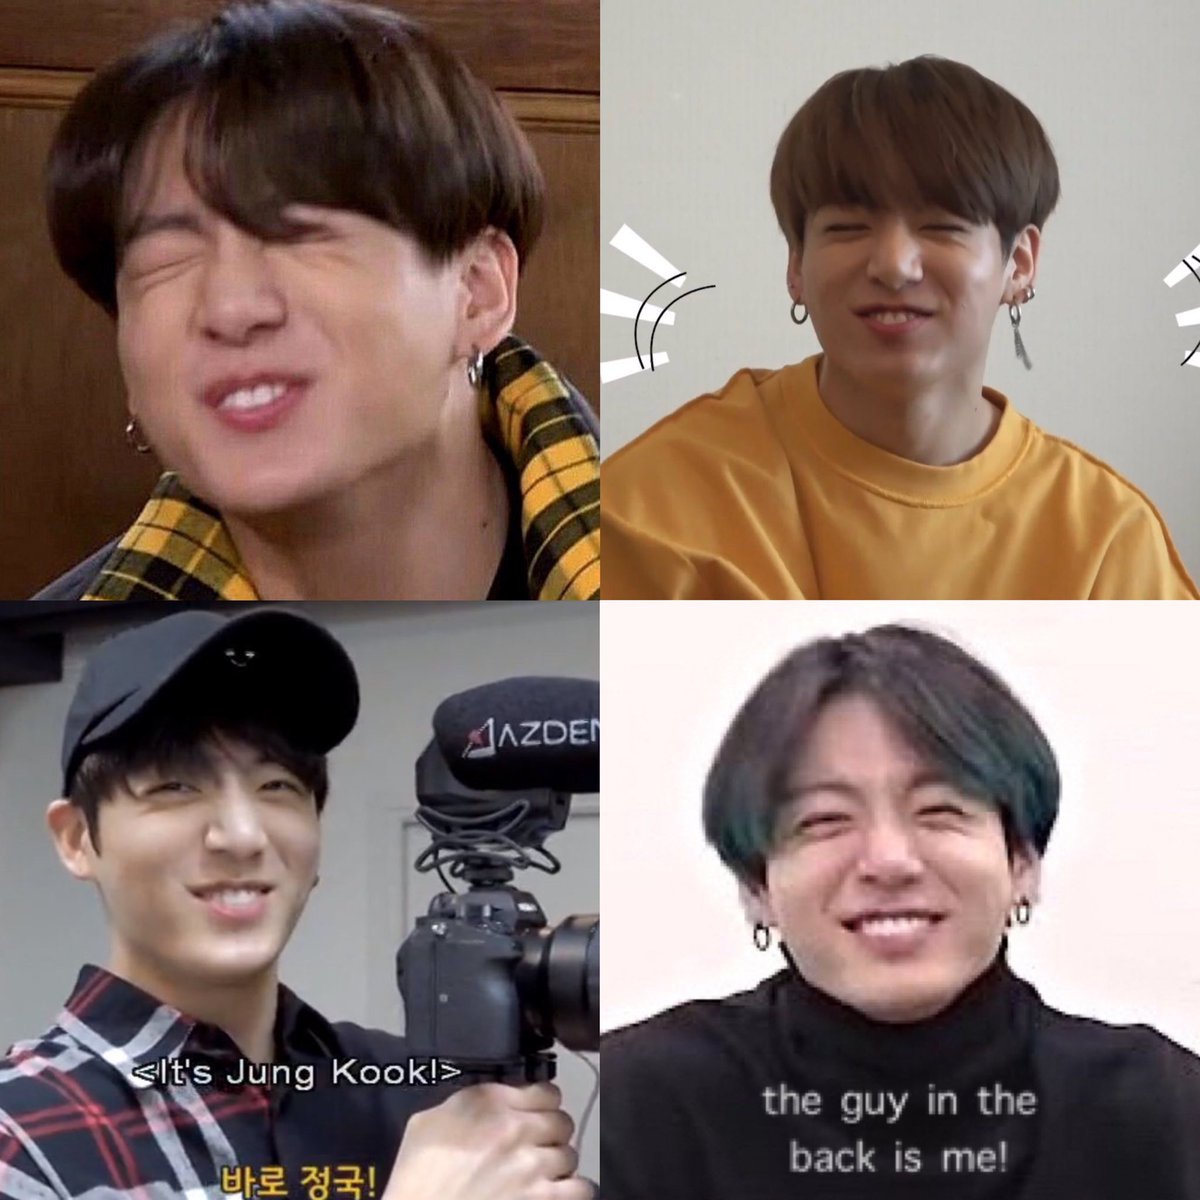 Jungkook’s little habits in moodboards a little thread: Jungkook’s full cheeks and little teeth smile (1/6)